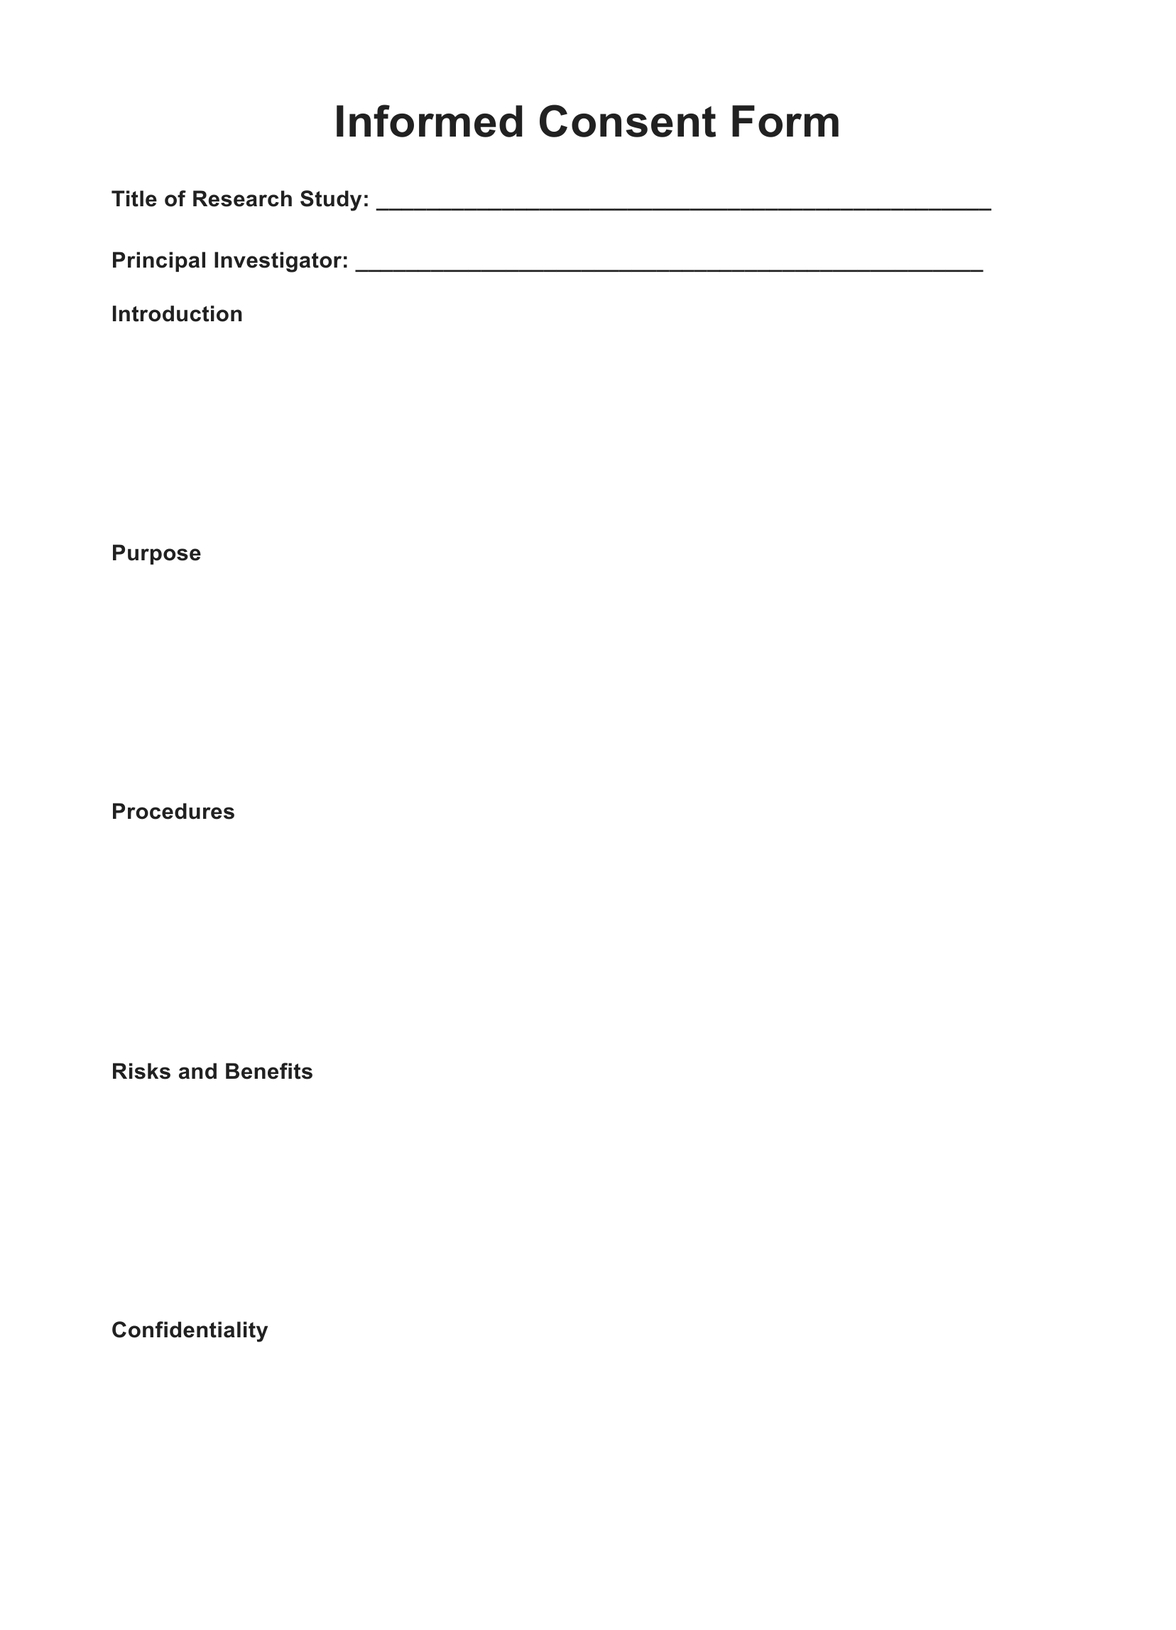 Informed Consent Form PDF Example